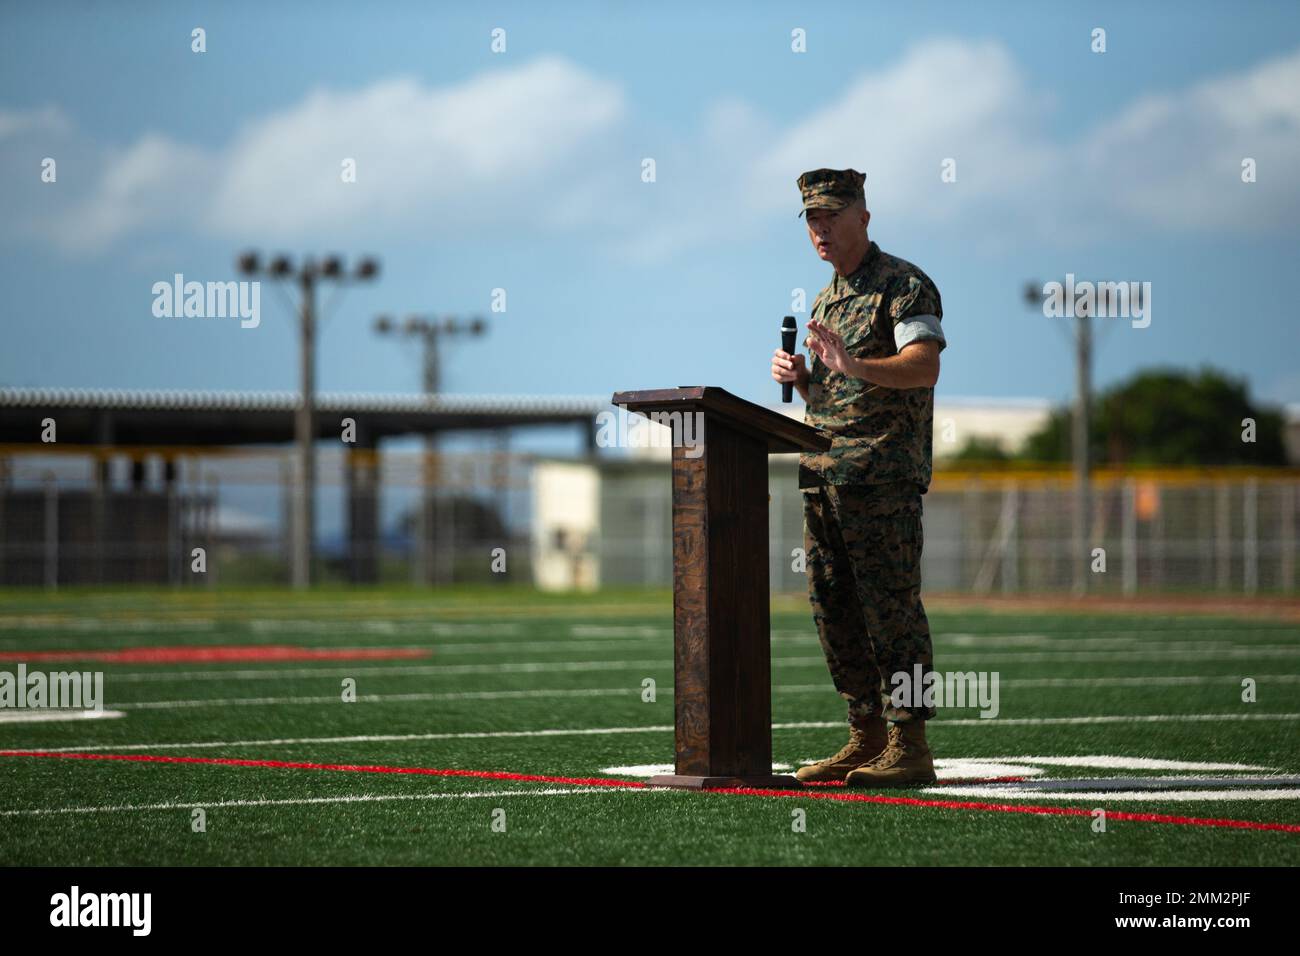 U.S. Marine Corps Maj. Gen. Jay Bargeron, 3d Marine Division Commanding General, addresses Marines, Sailors, veterans, and guests during a battle colors rededication ceremony on Camp Hansen, Okinawa, Japan, Sept. 14, 2022. The ceremony commemorated the Division’s 80th Anniversary and its legacy of valor, honor, and fidelity. The 3d Marine Division was activated at Camp Elliot, San Diego, Sept. 16, 1942 and has taken part in combat operations from World War II and Vietnam through Iraq and Afghanistan. The current Marines of 3d Marine Division continue to build on this legacy today as a critical Stock Photo